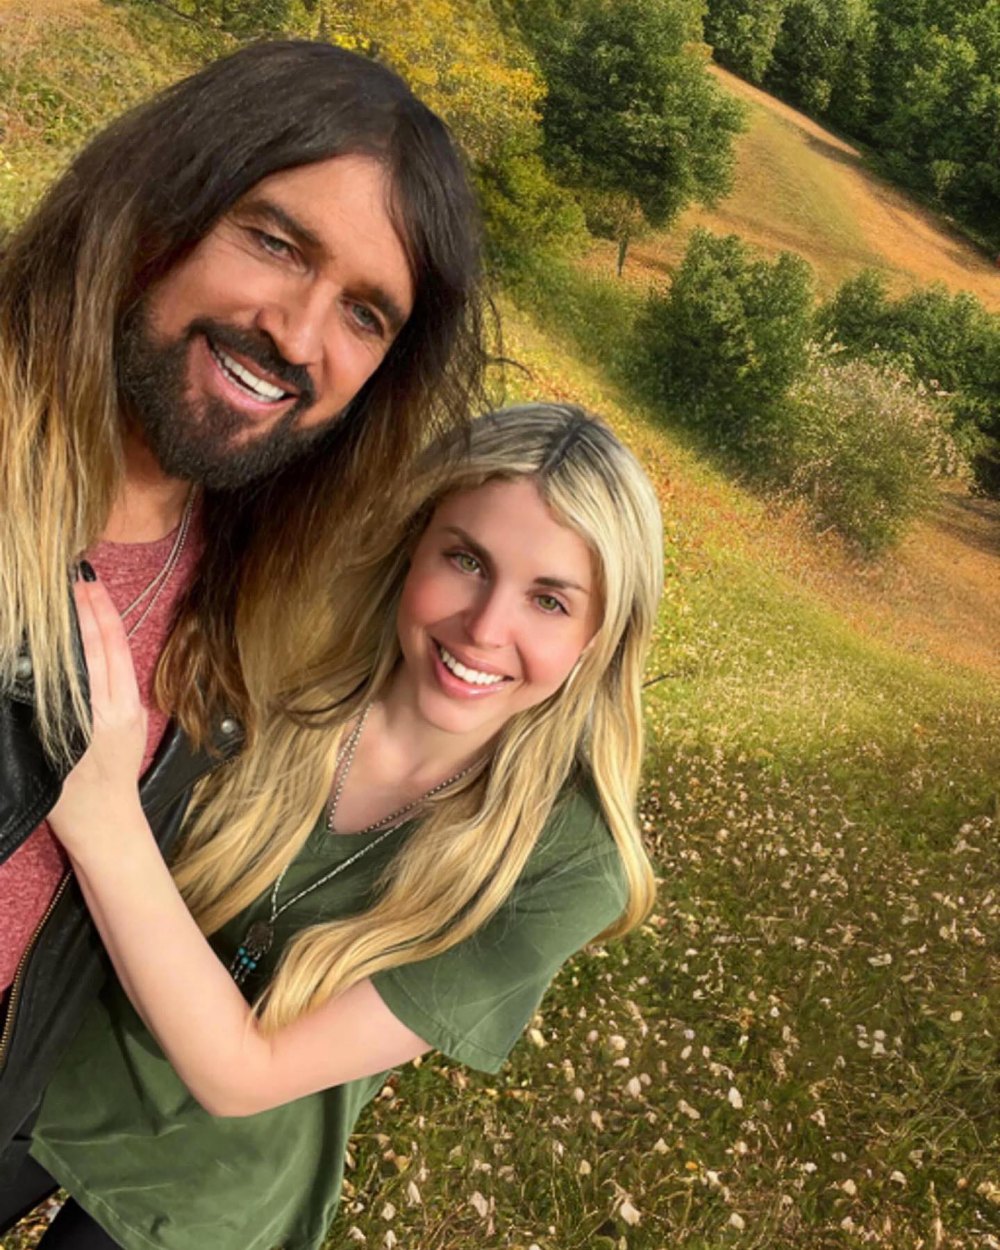 Firerose Accuses Estranged Husband Billy Ray Cyrus of Domestic Abuse in New Divorce Filing 620